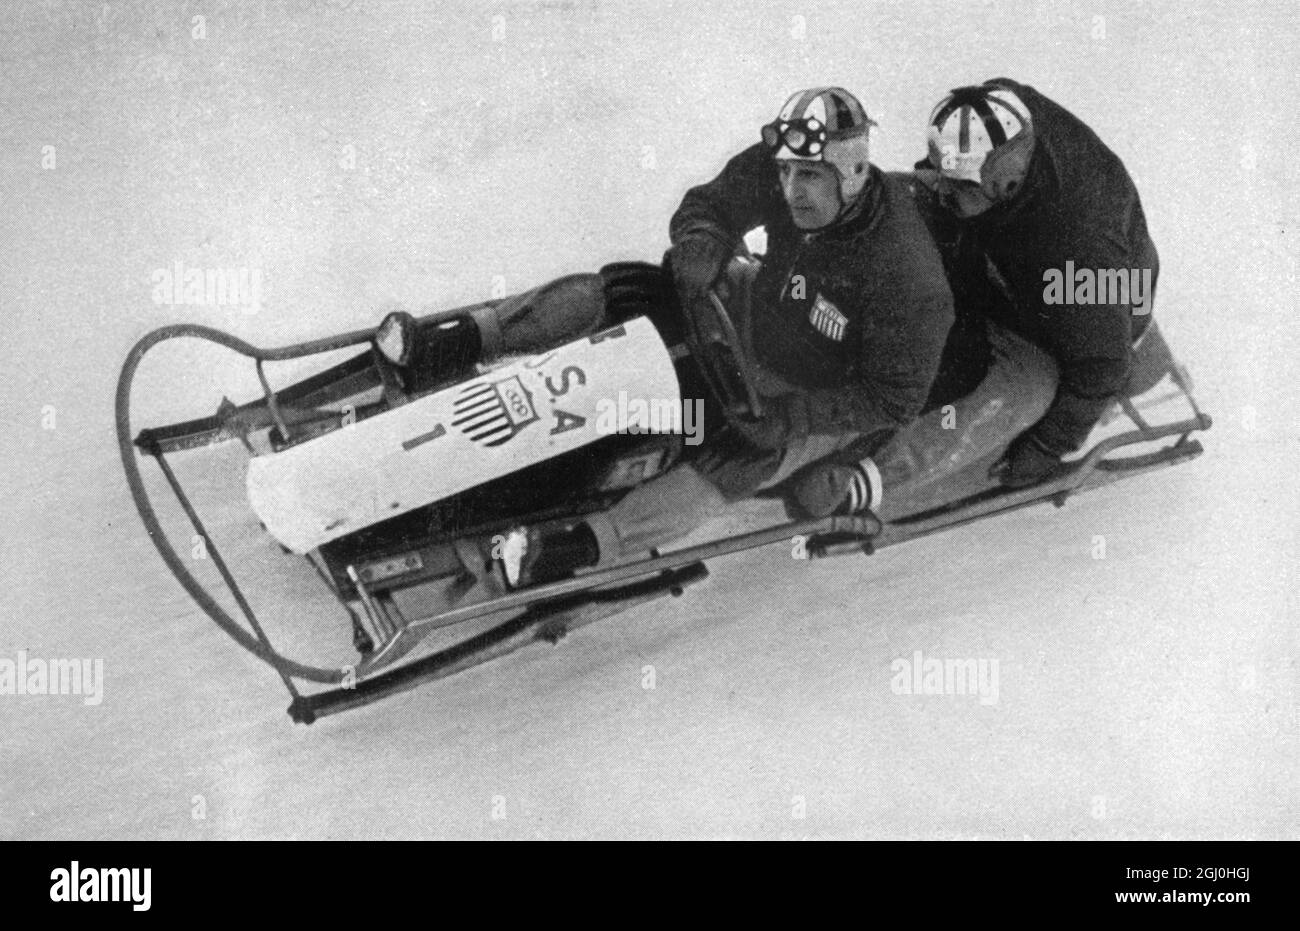 1936 Winter Olympic Games Garmisch - Partenkirchen, Germany USA I - 2 man bobsleigh team of Alan M. Washbond and Ivan Elmore Brown in action. They won the gold medal. ©TopFoto Stock Photo